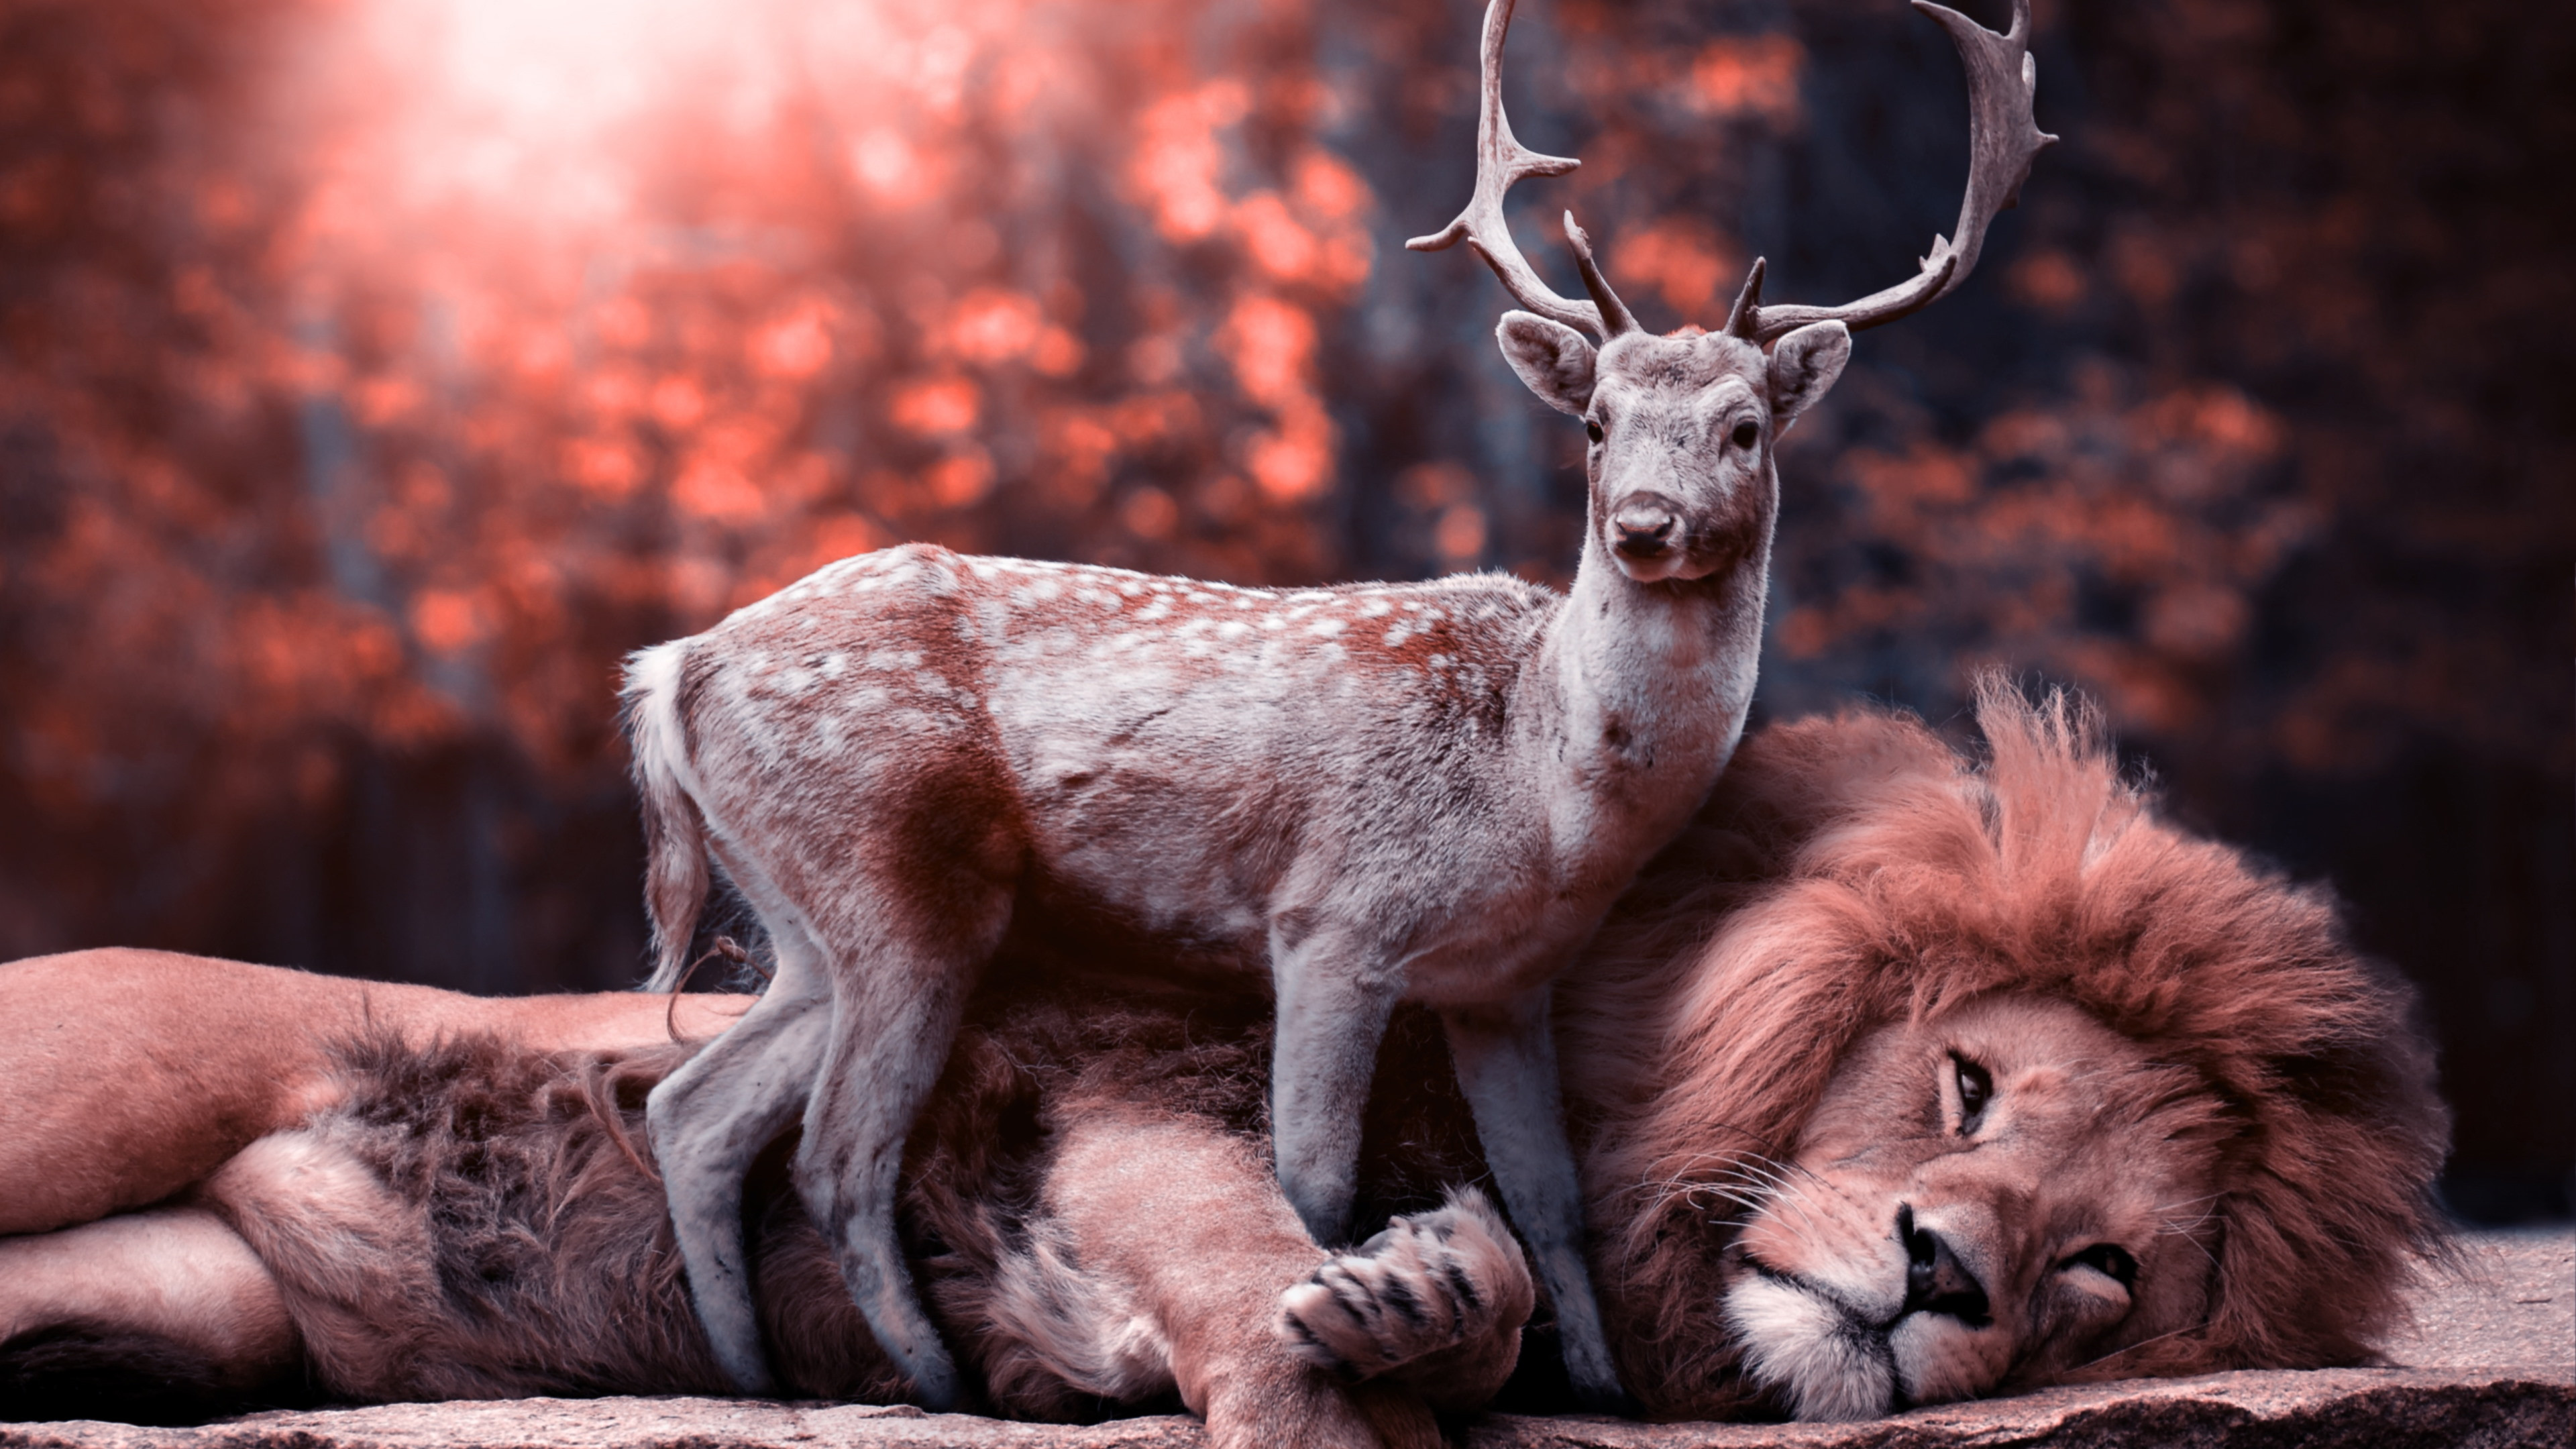 Download wallpaper: The lion and the deer 3840x2160